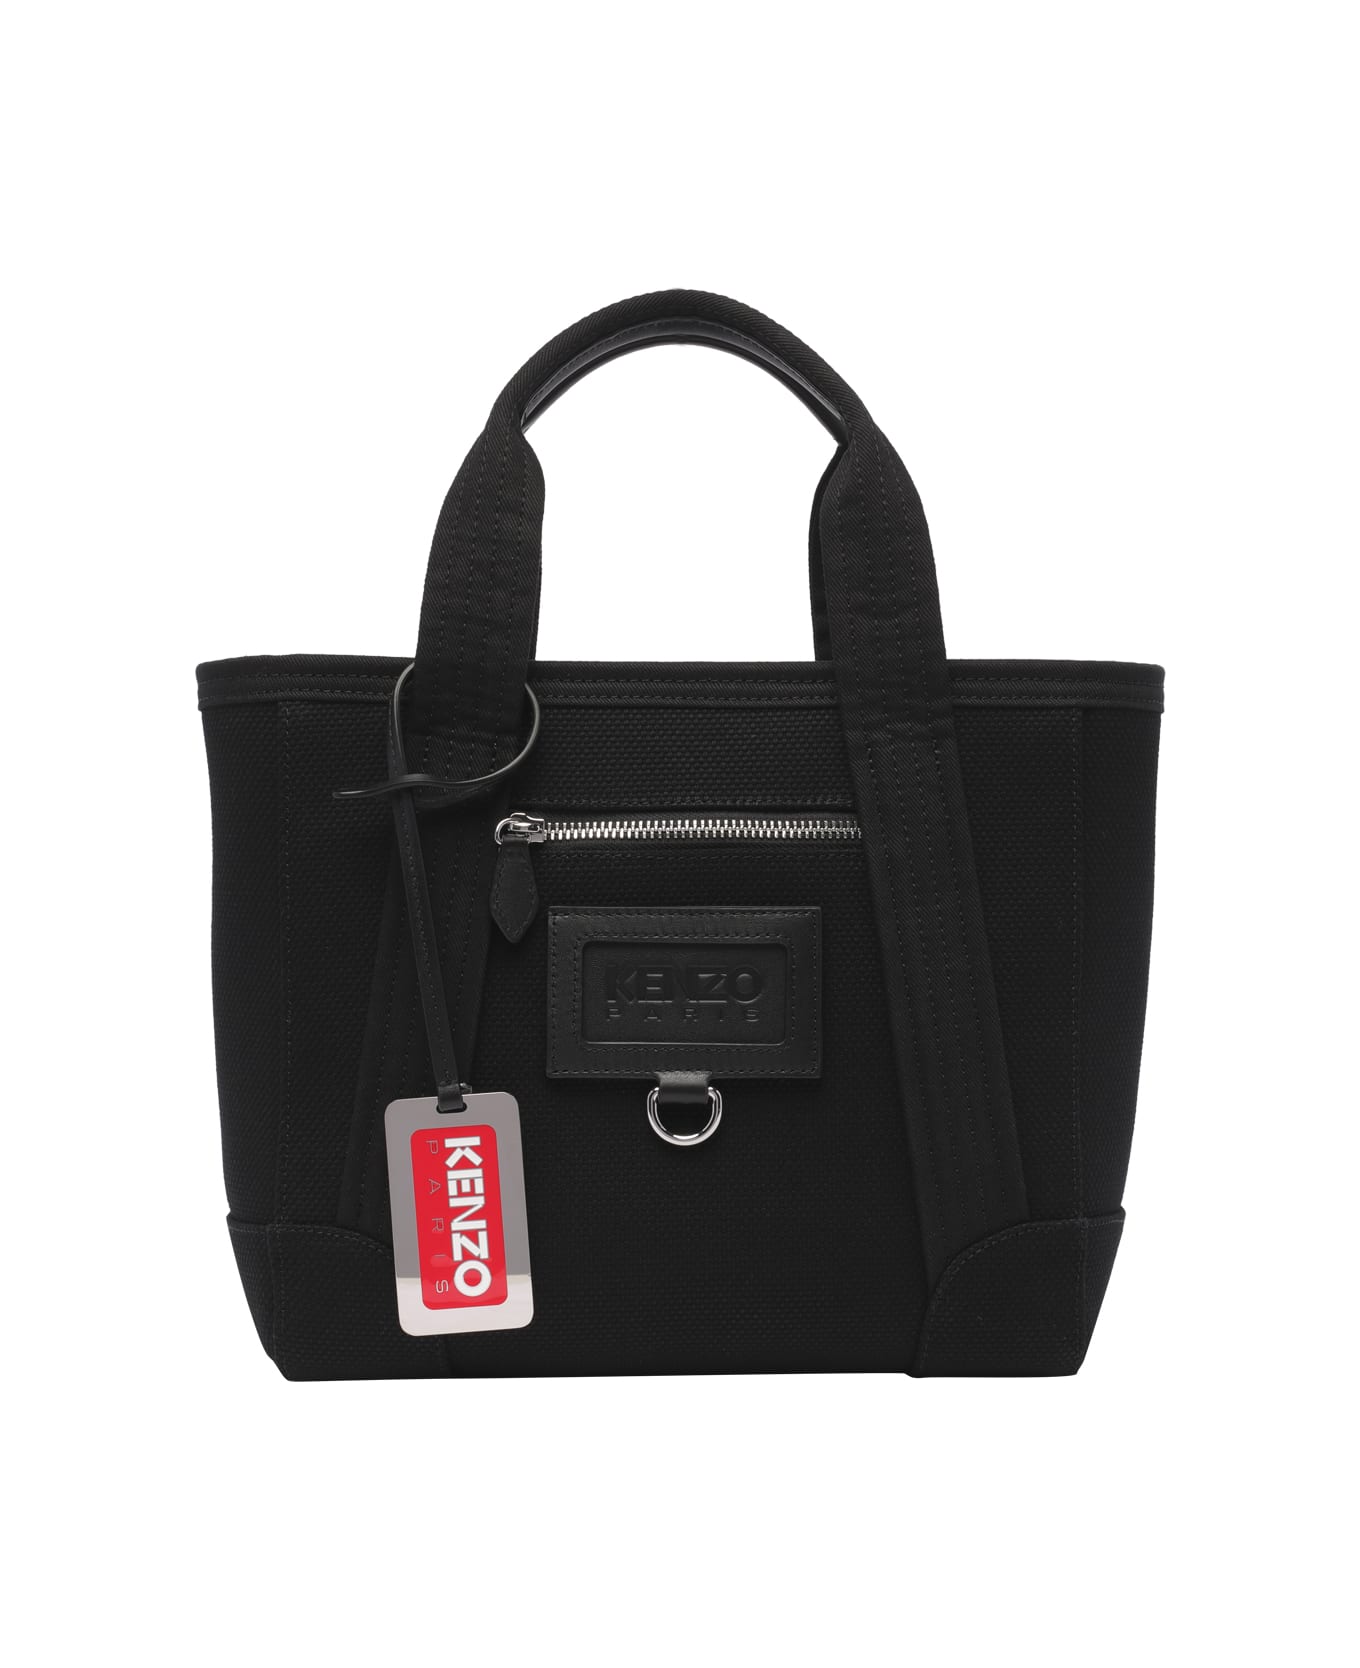 Kenzo Small Tote - Black トートバッグ